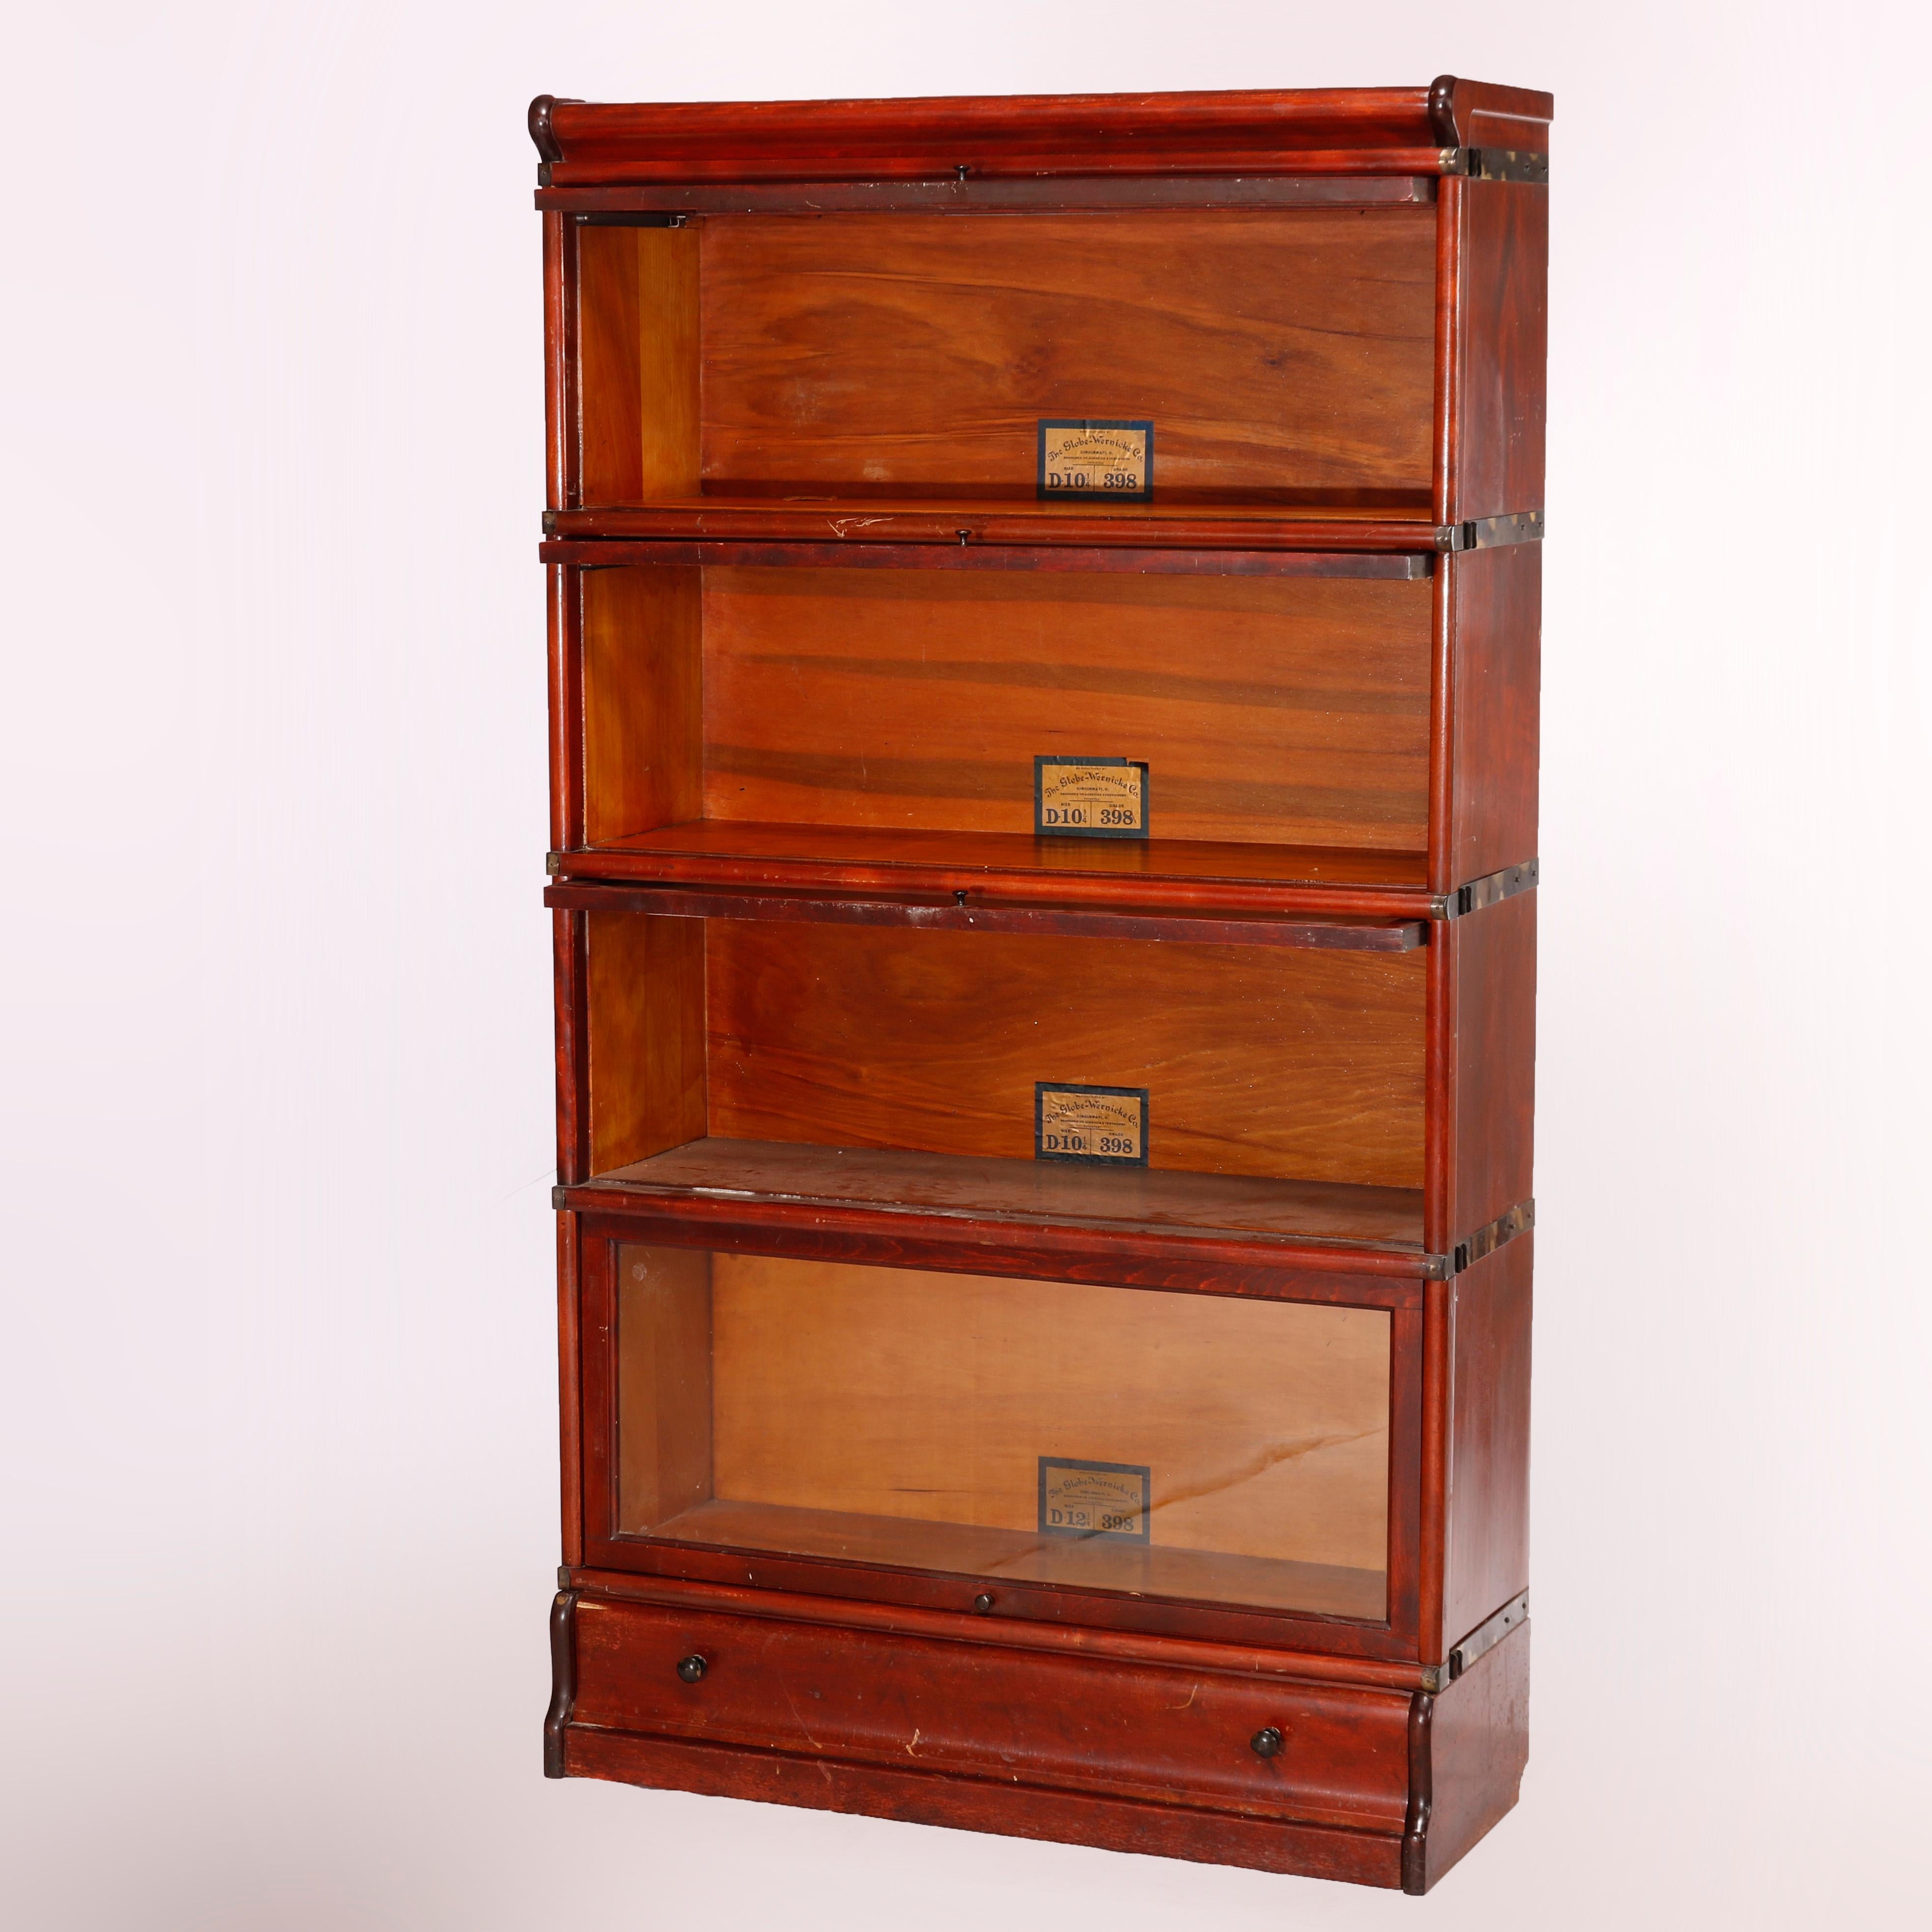 An antique Arts & Crafts barrister bookcase by Globe Wernicke offers mahogany construction with four stacks, each having pull out glass doors and seated on ogee base, maker label as photographed, c1910
 
Measures- 61.25''H X 34''W X 12.5''D; 1st